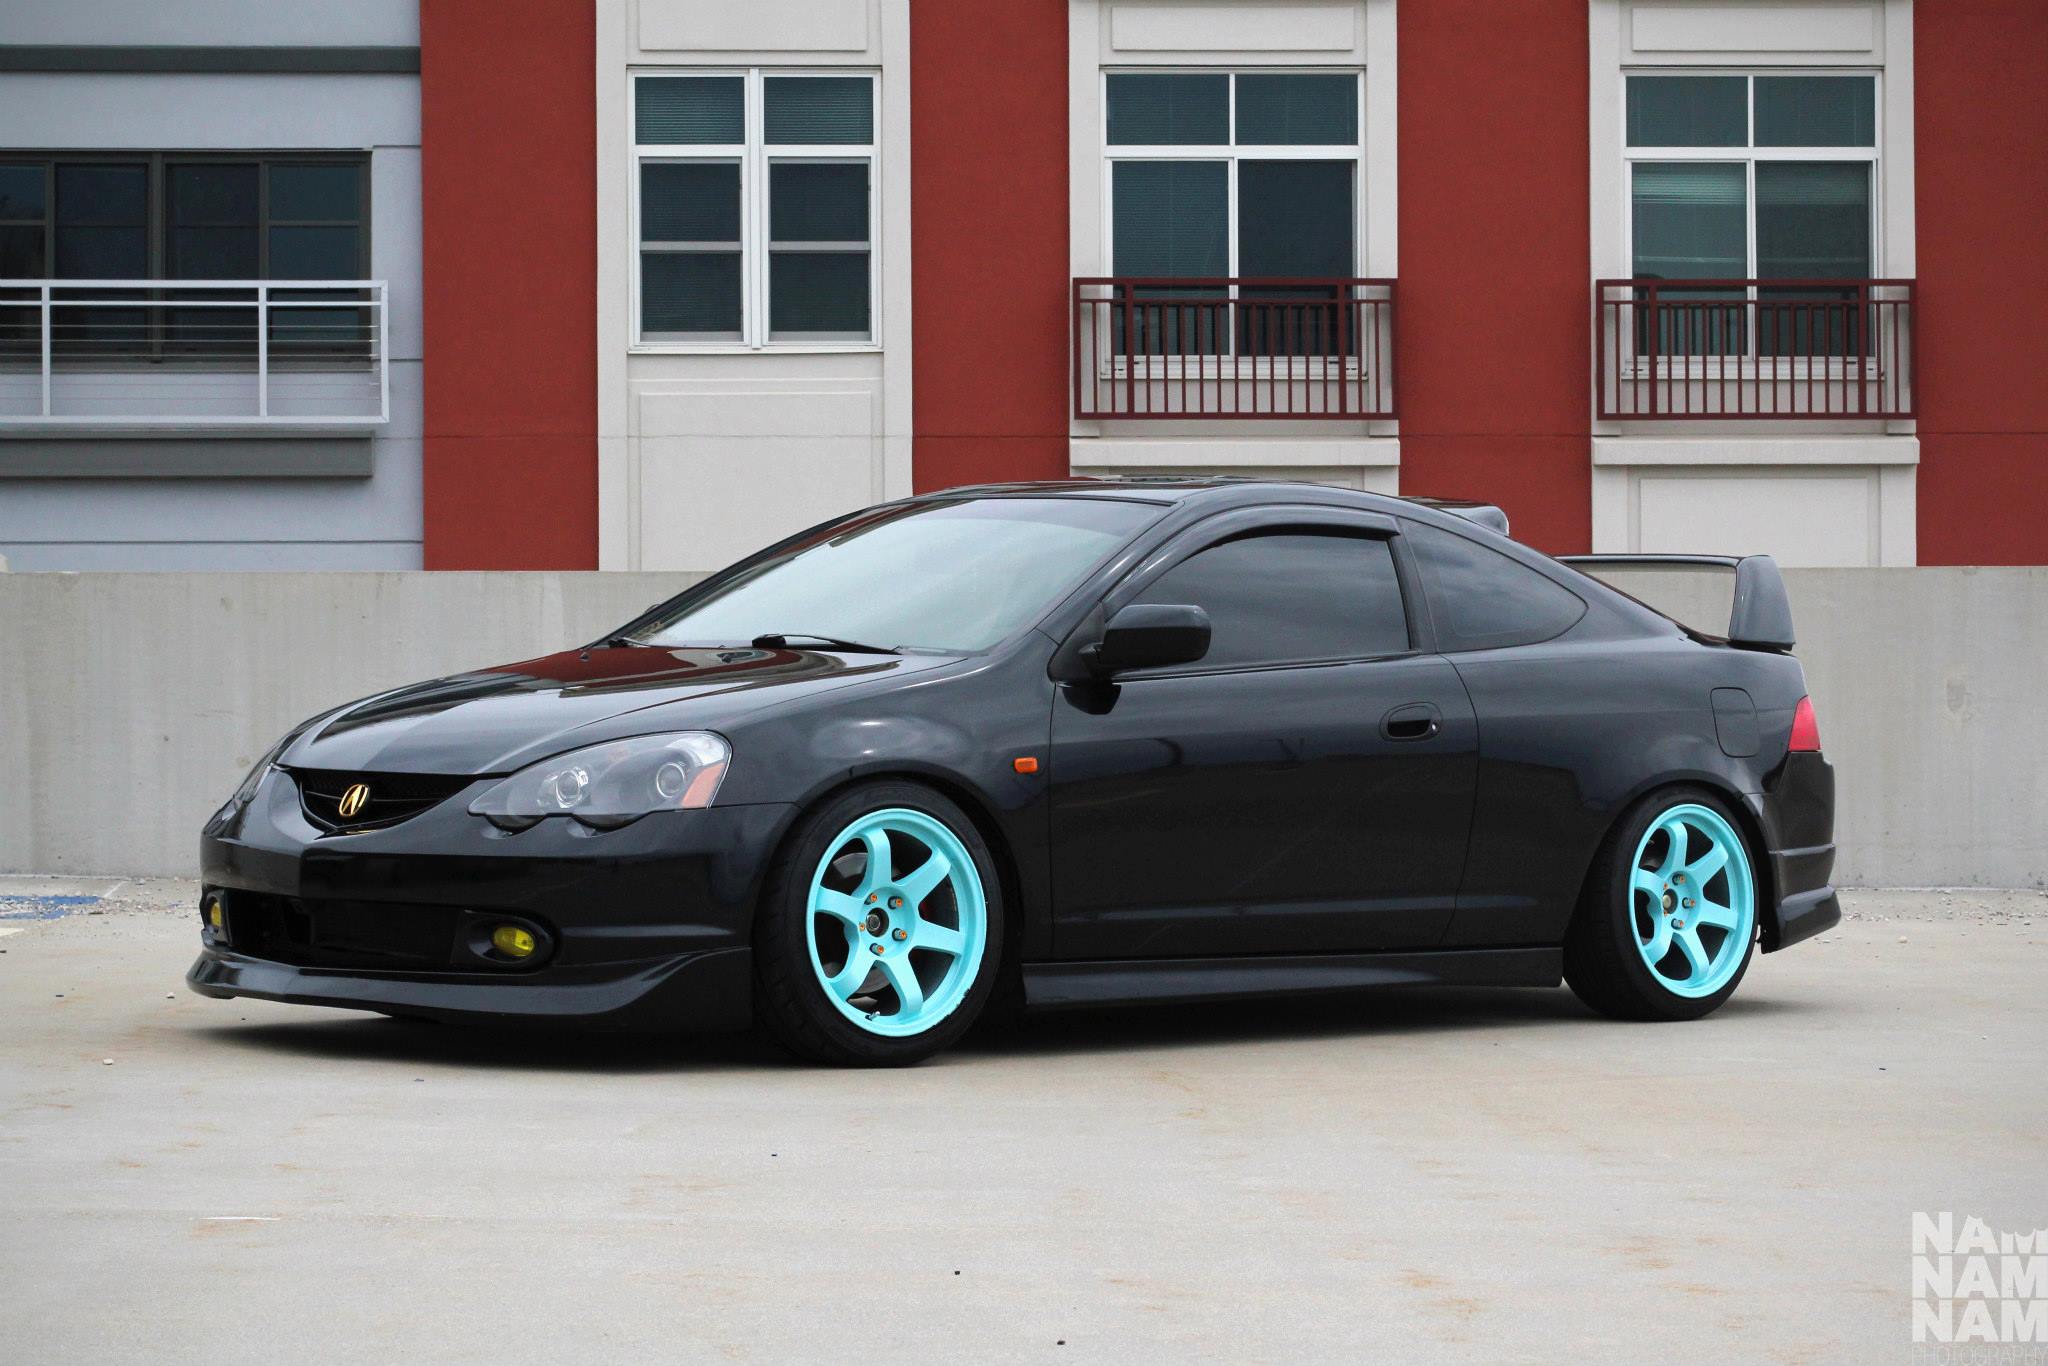 Stanced and supercharged Rsx - Rpm City